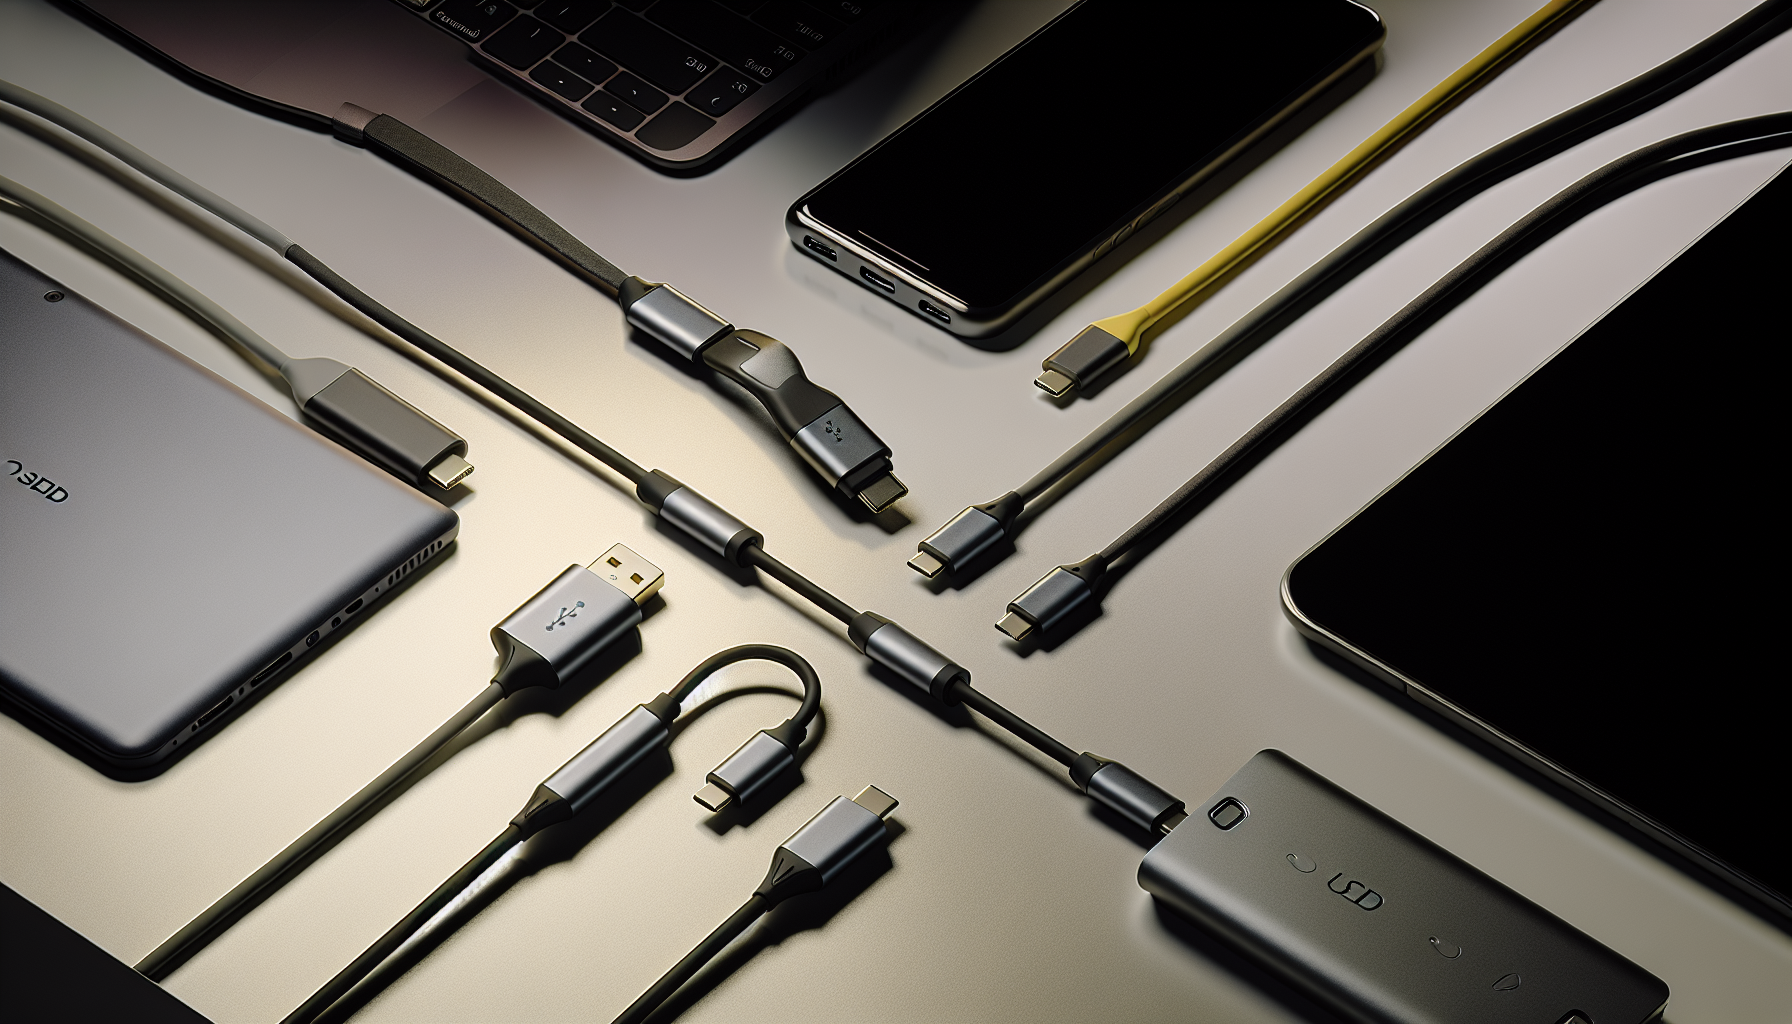 Various USB C cables and devices